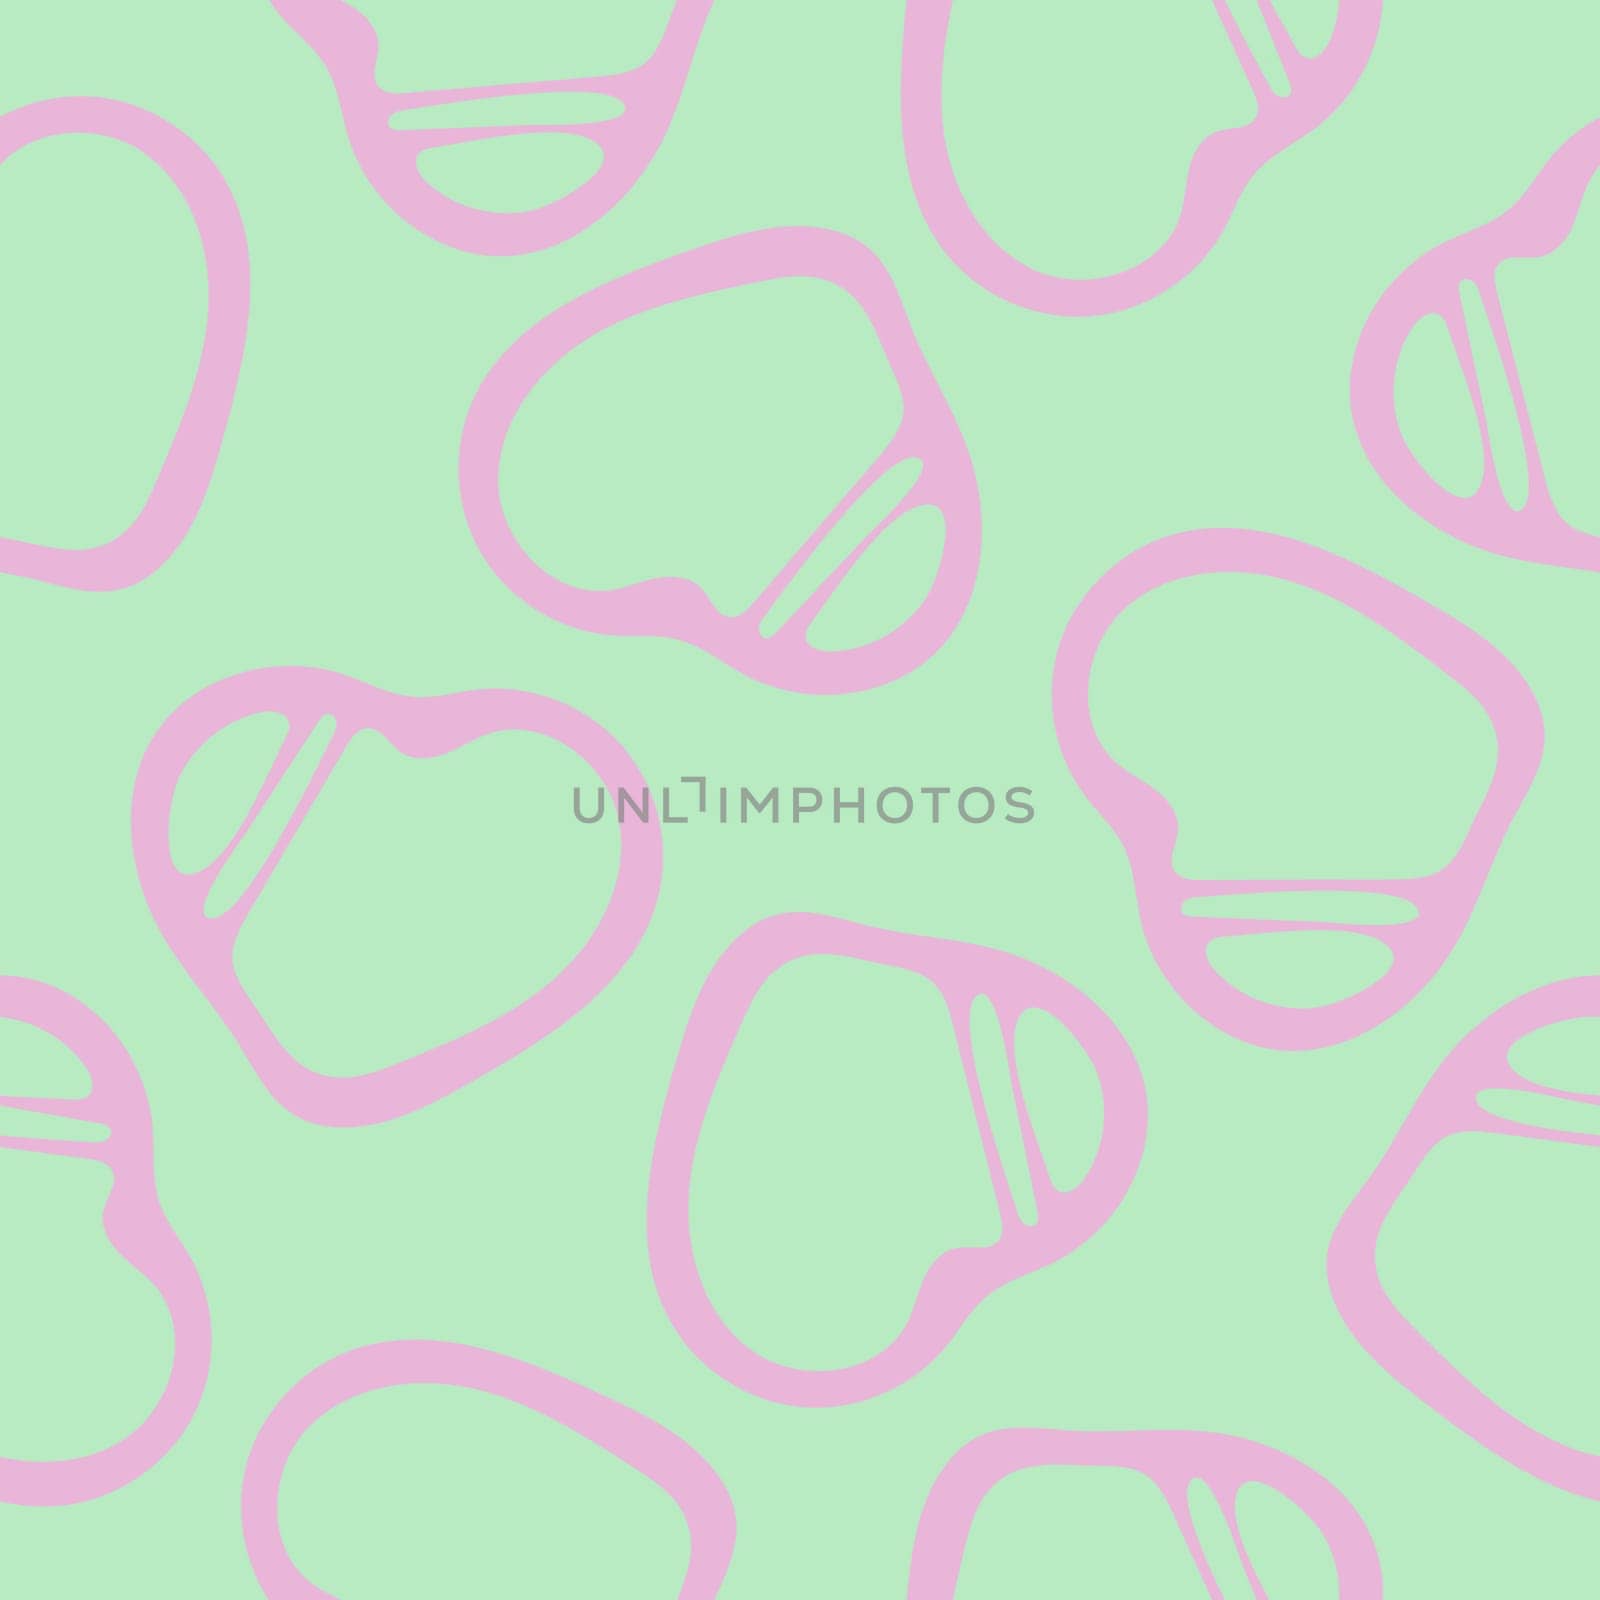 Hand Drawn Seamless Patterns with Hearts in Doodle Style. Romantic Love Digital Paper for Valentines Day. Colorful Hearts on Green Pastel Background.